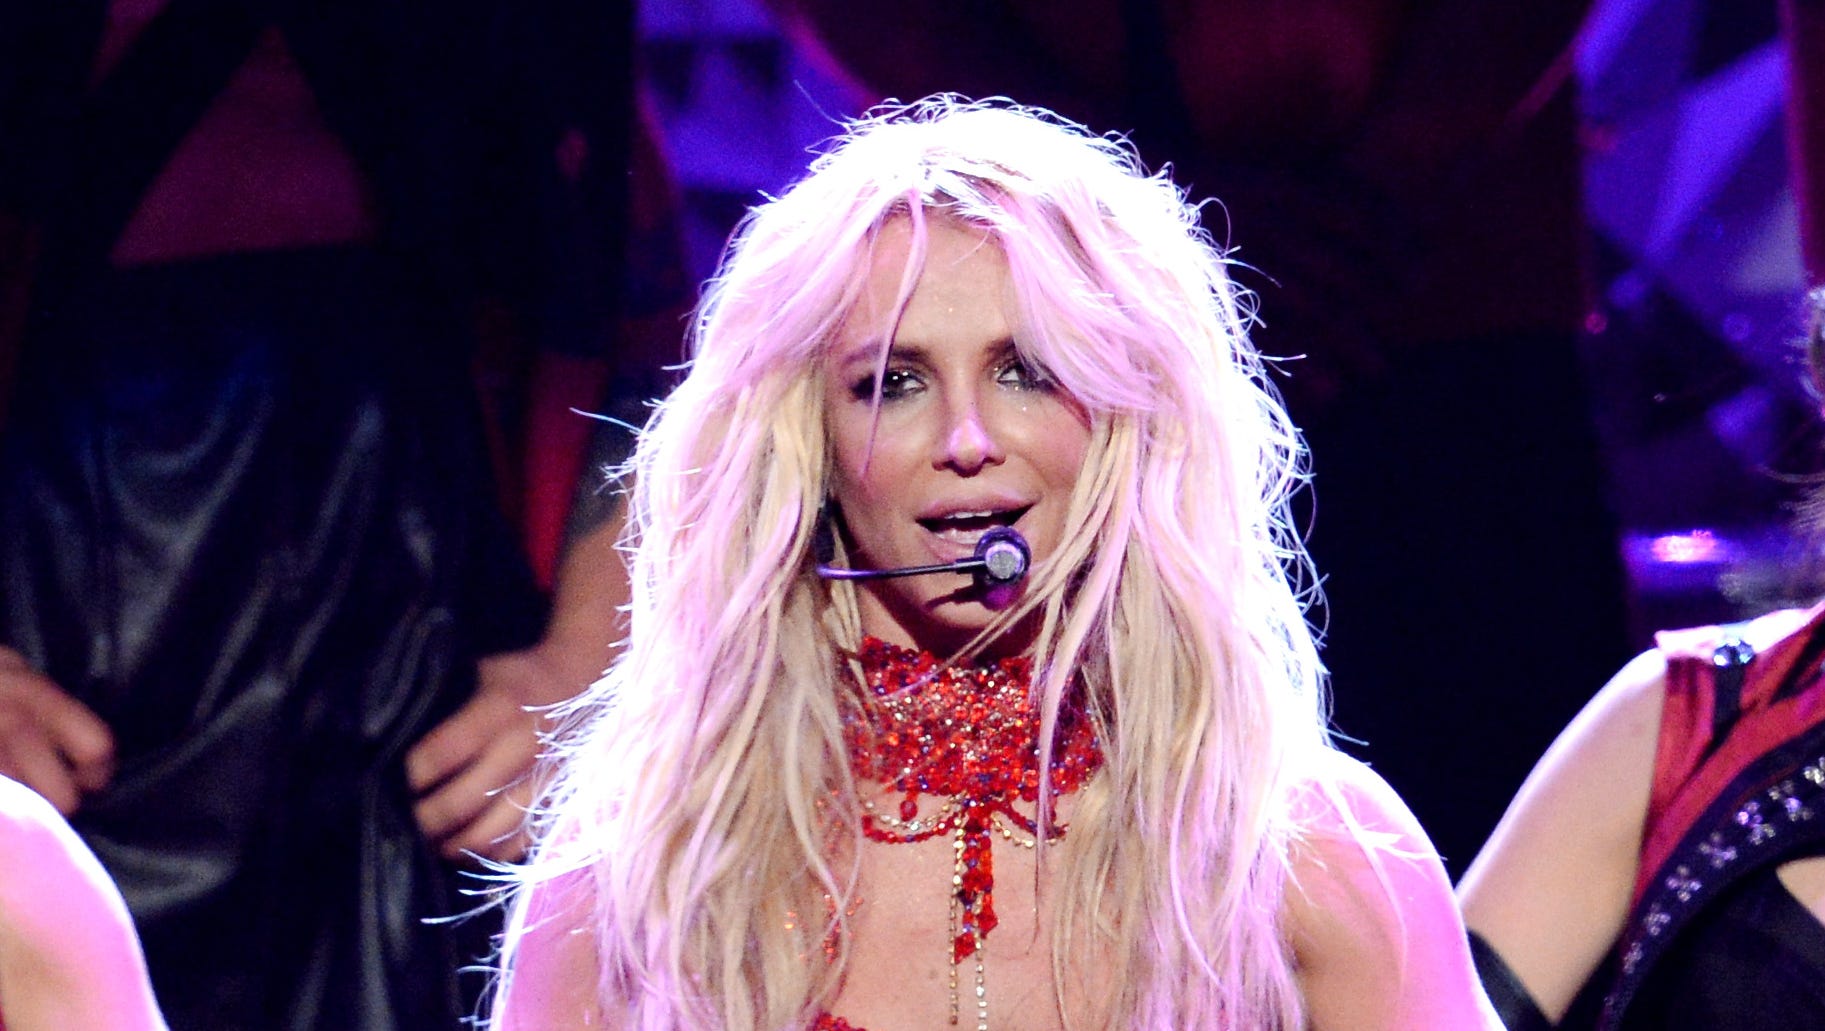 Oops!... Britney Spears is getting 'Clumsy' in her new song